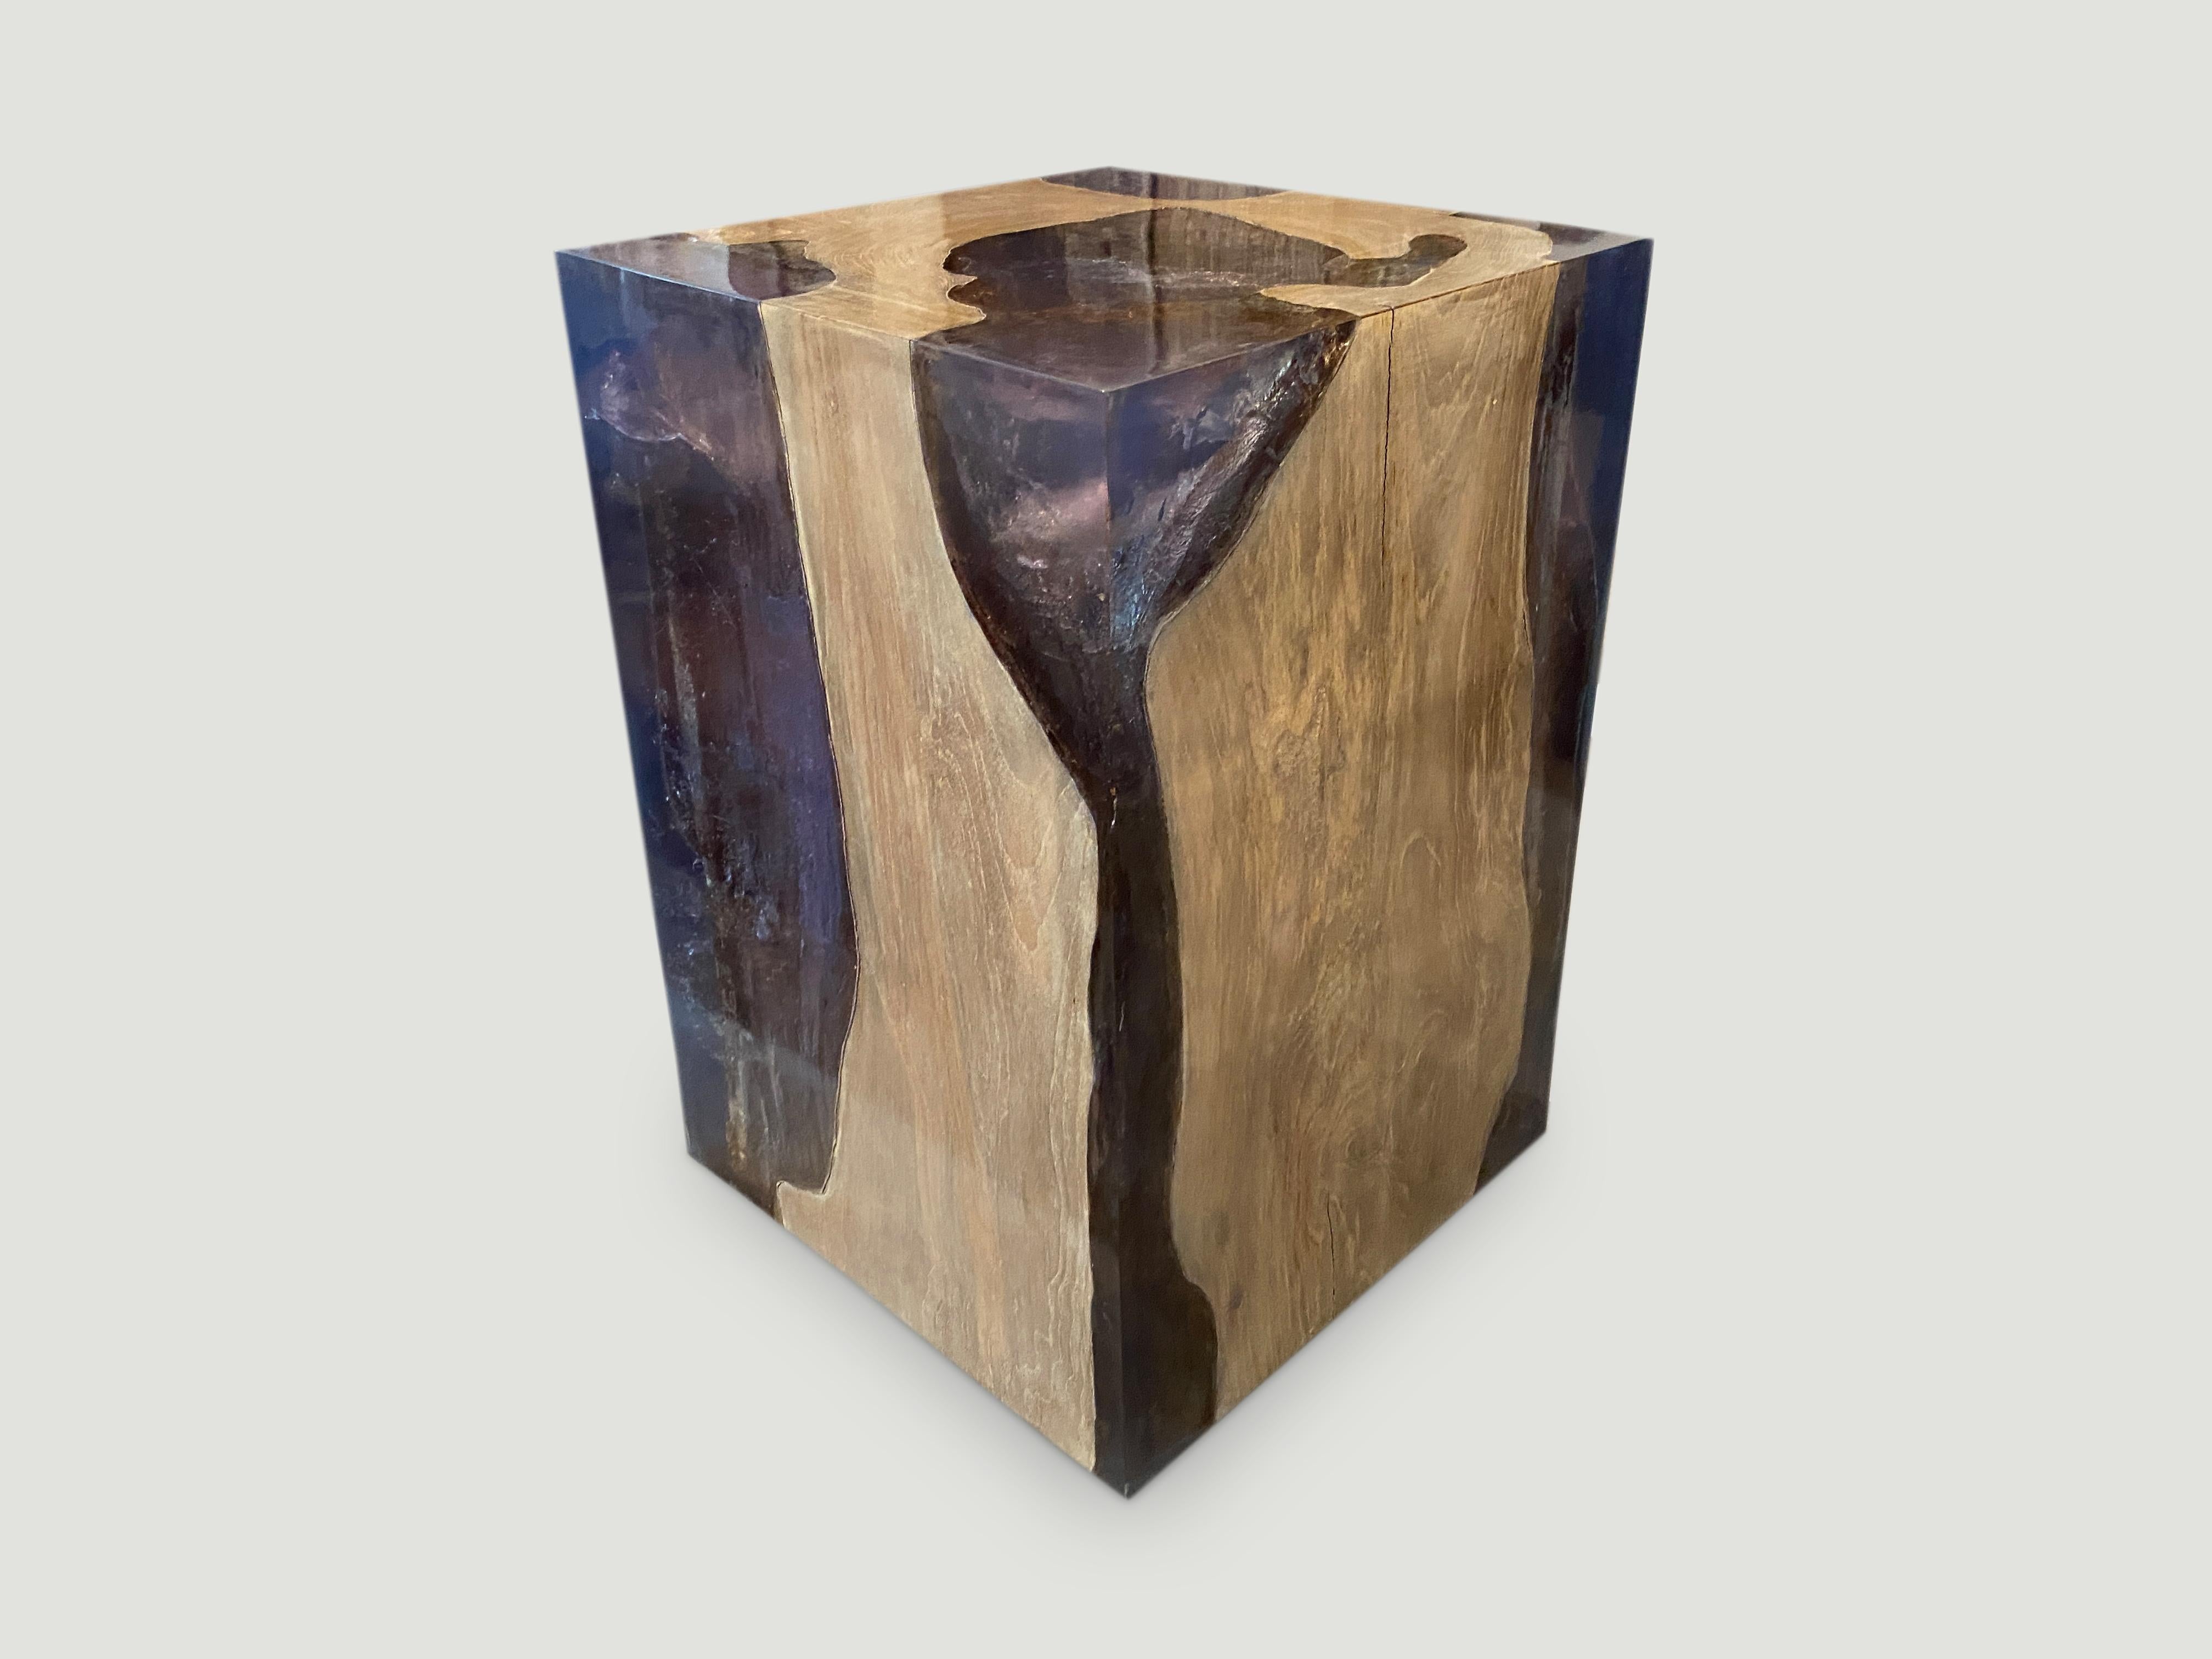 The St. Barts side table is a unique variation of the teak and cracked resin cube. Ice blue, aqua resin, or new to 2020, deep sea blue resin, is cracked and added into the natural grooves of the bleached teak wood and finally sanded and finished